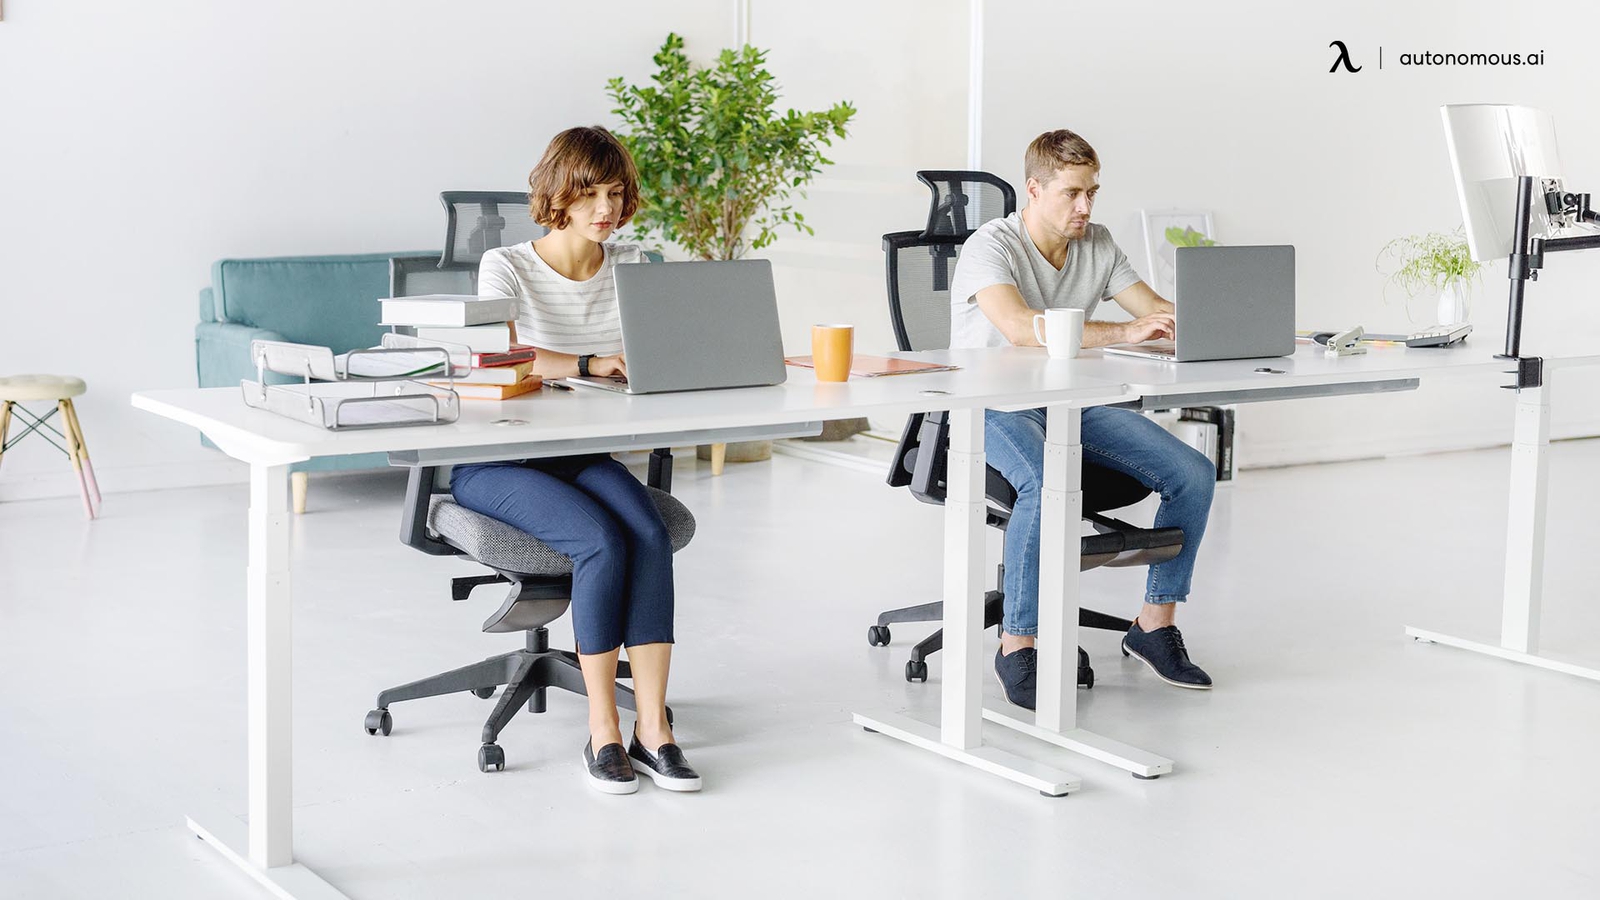 How to Have Good Posture at Work